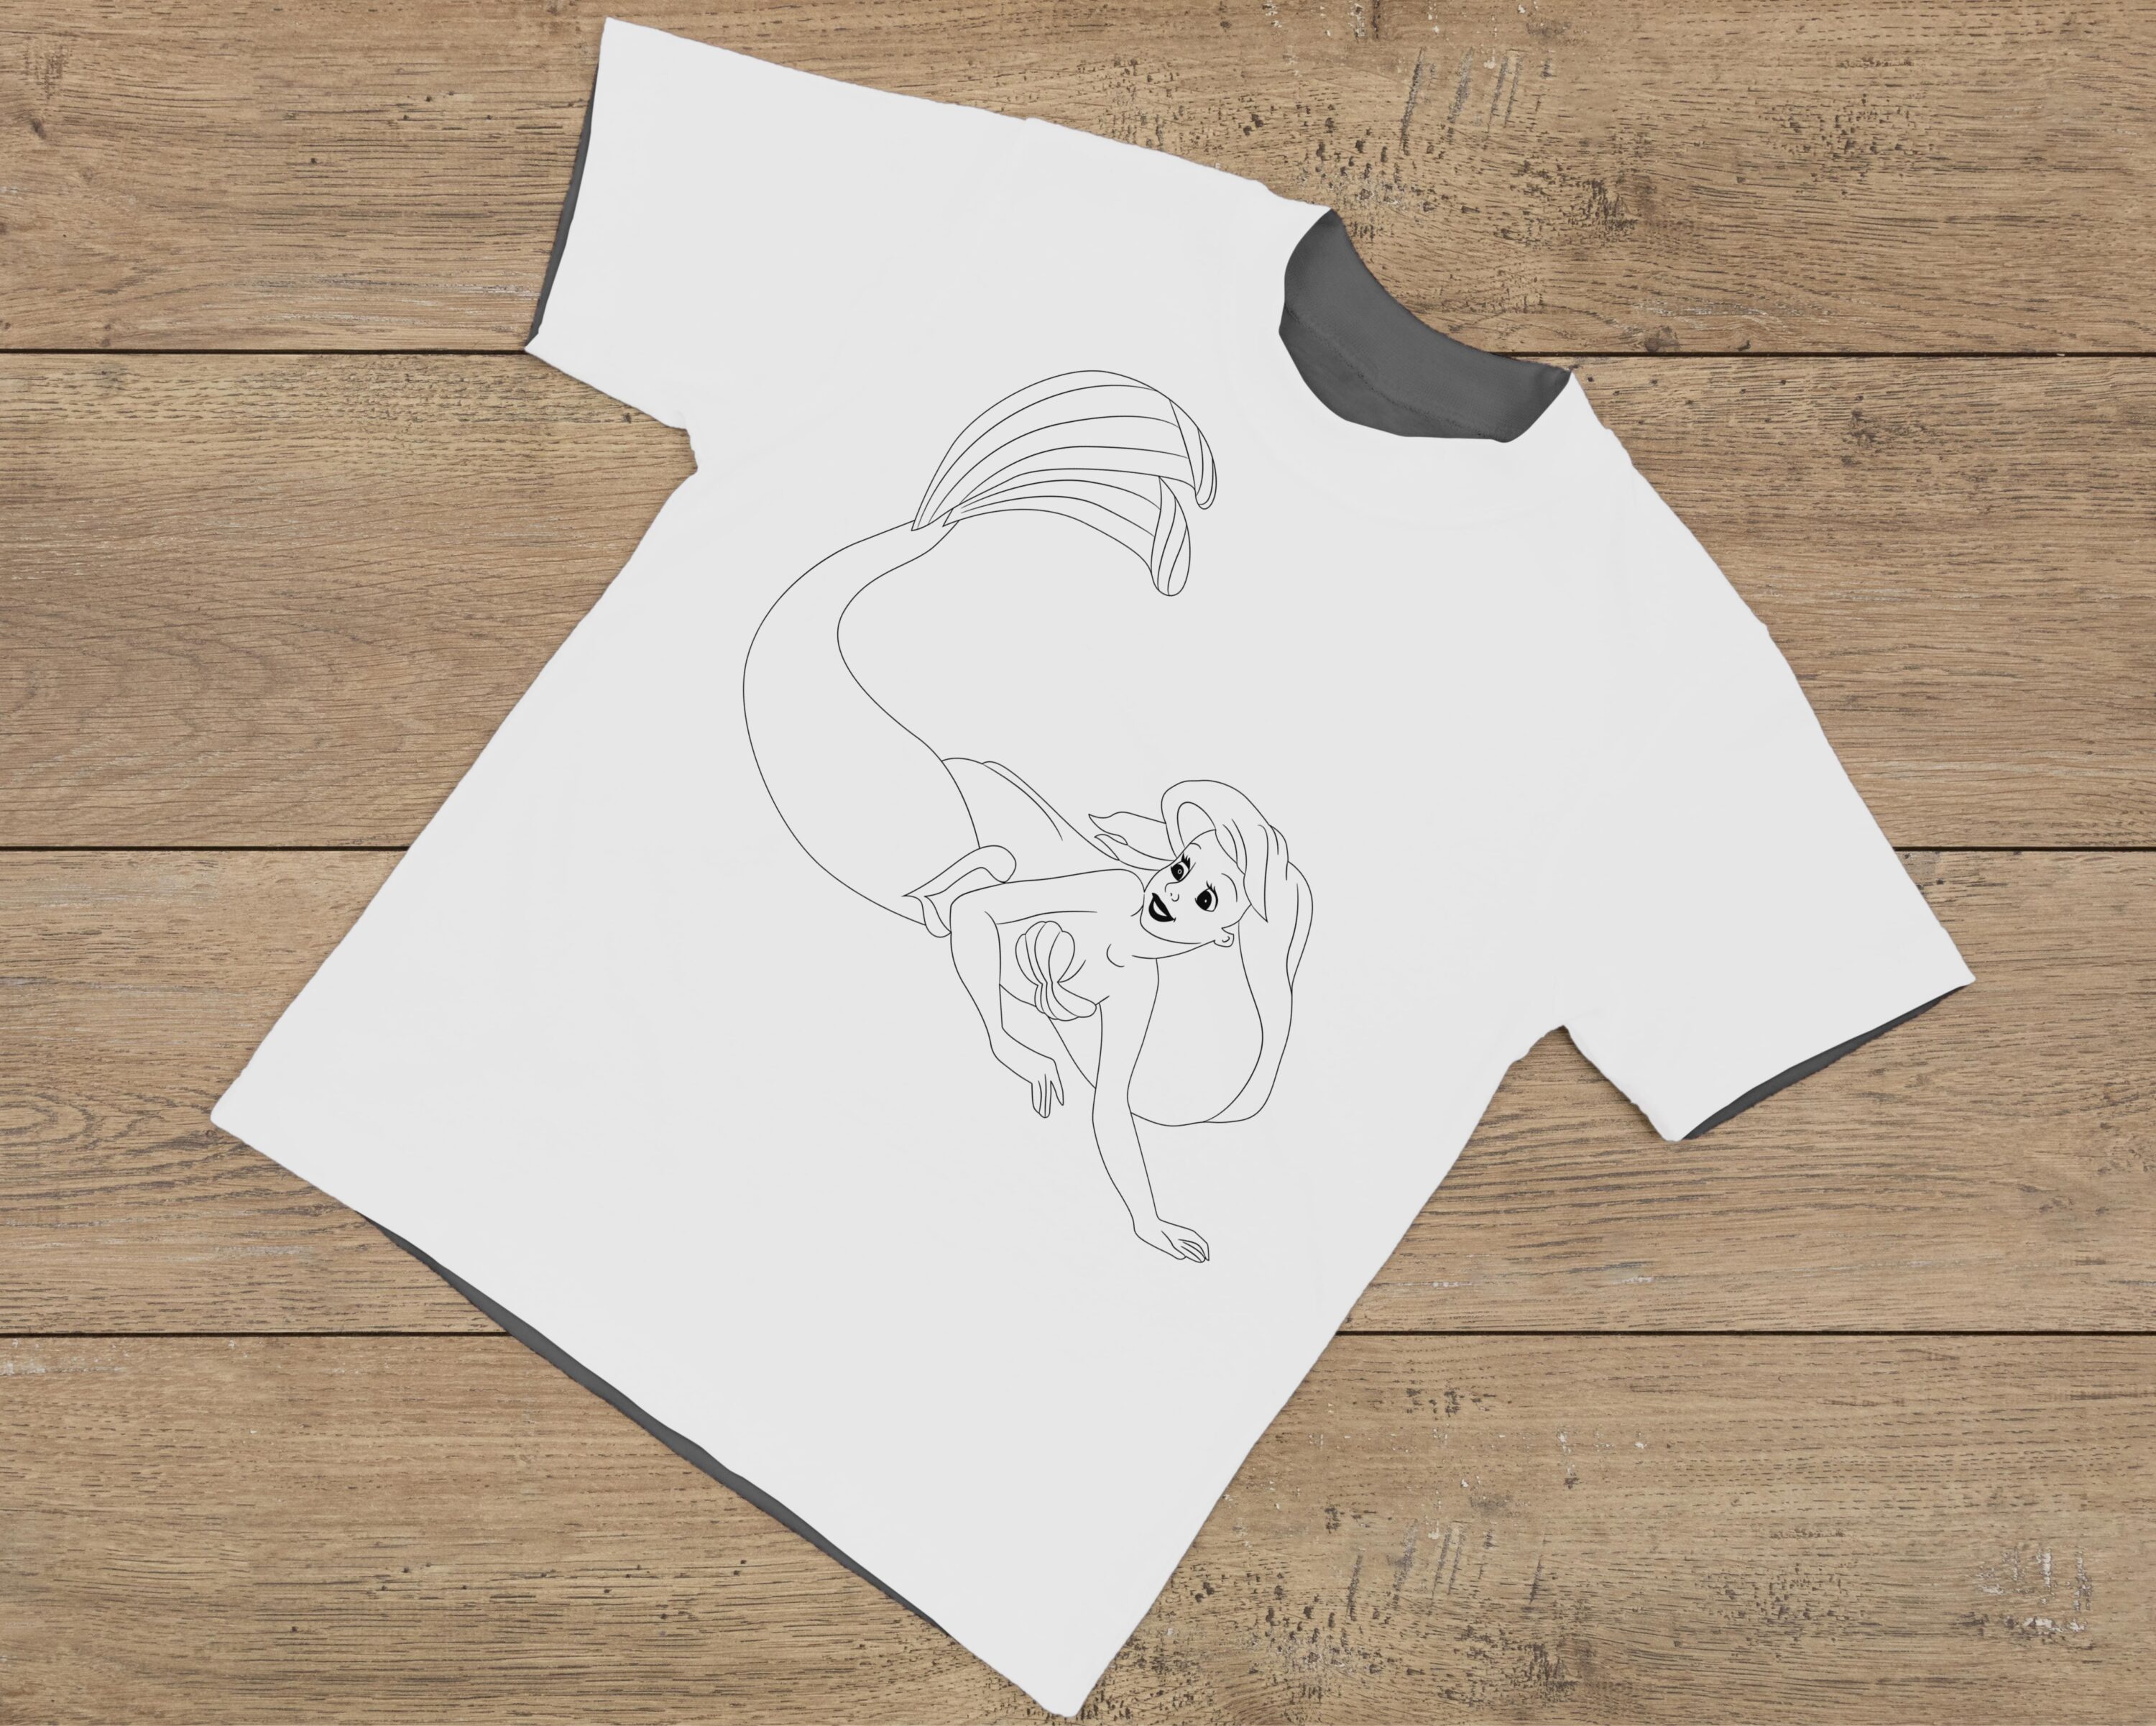 Awesome t-shirt prints with tails and more.